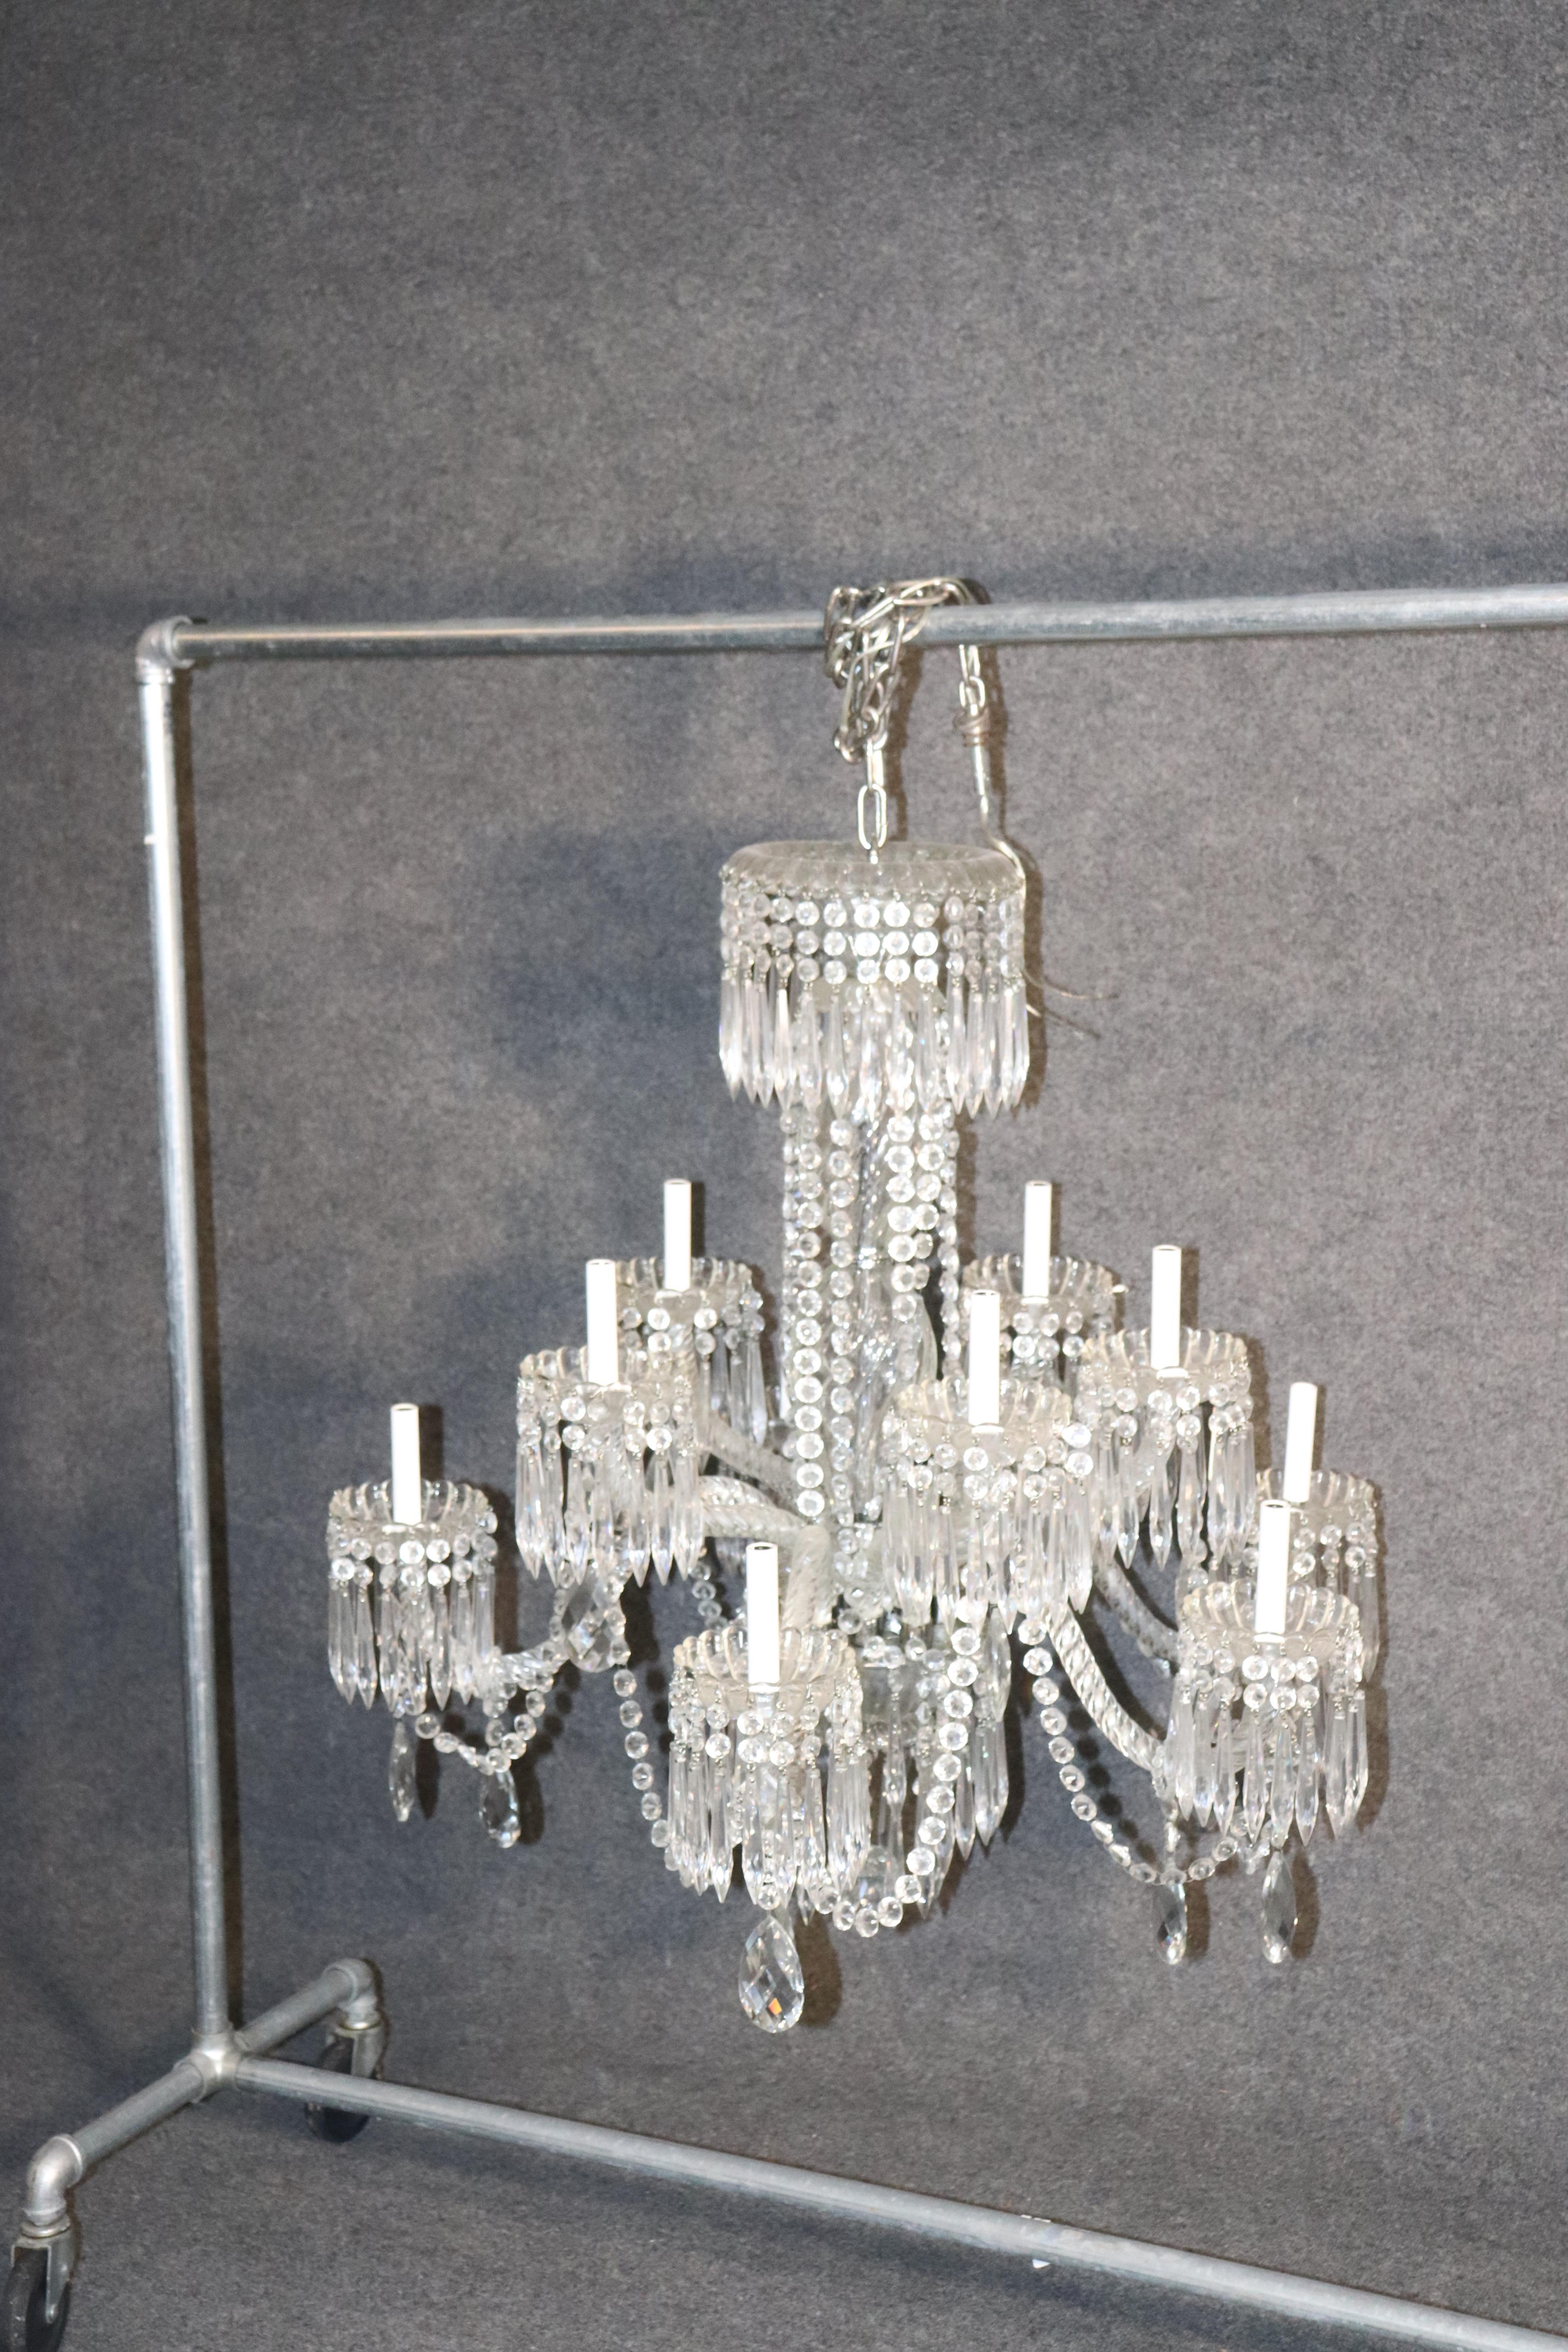 This is a gorgeous and very large antique Waterford cut crystal chandelier of the finest quality and very rare to find in such good condition. The chandelier dates to the 1920s.